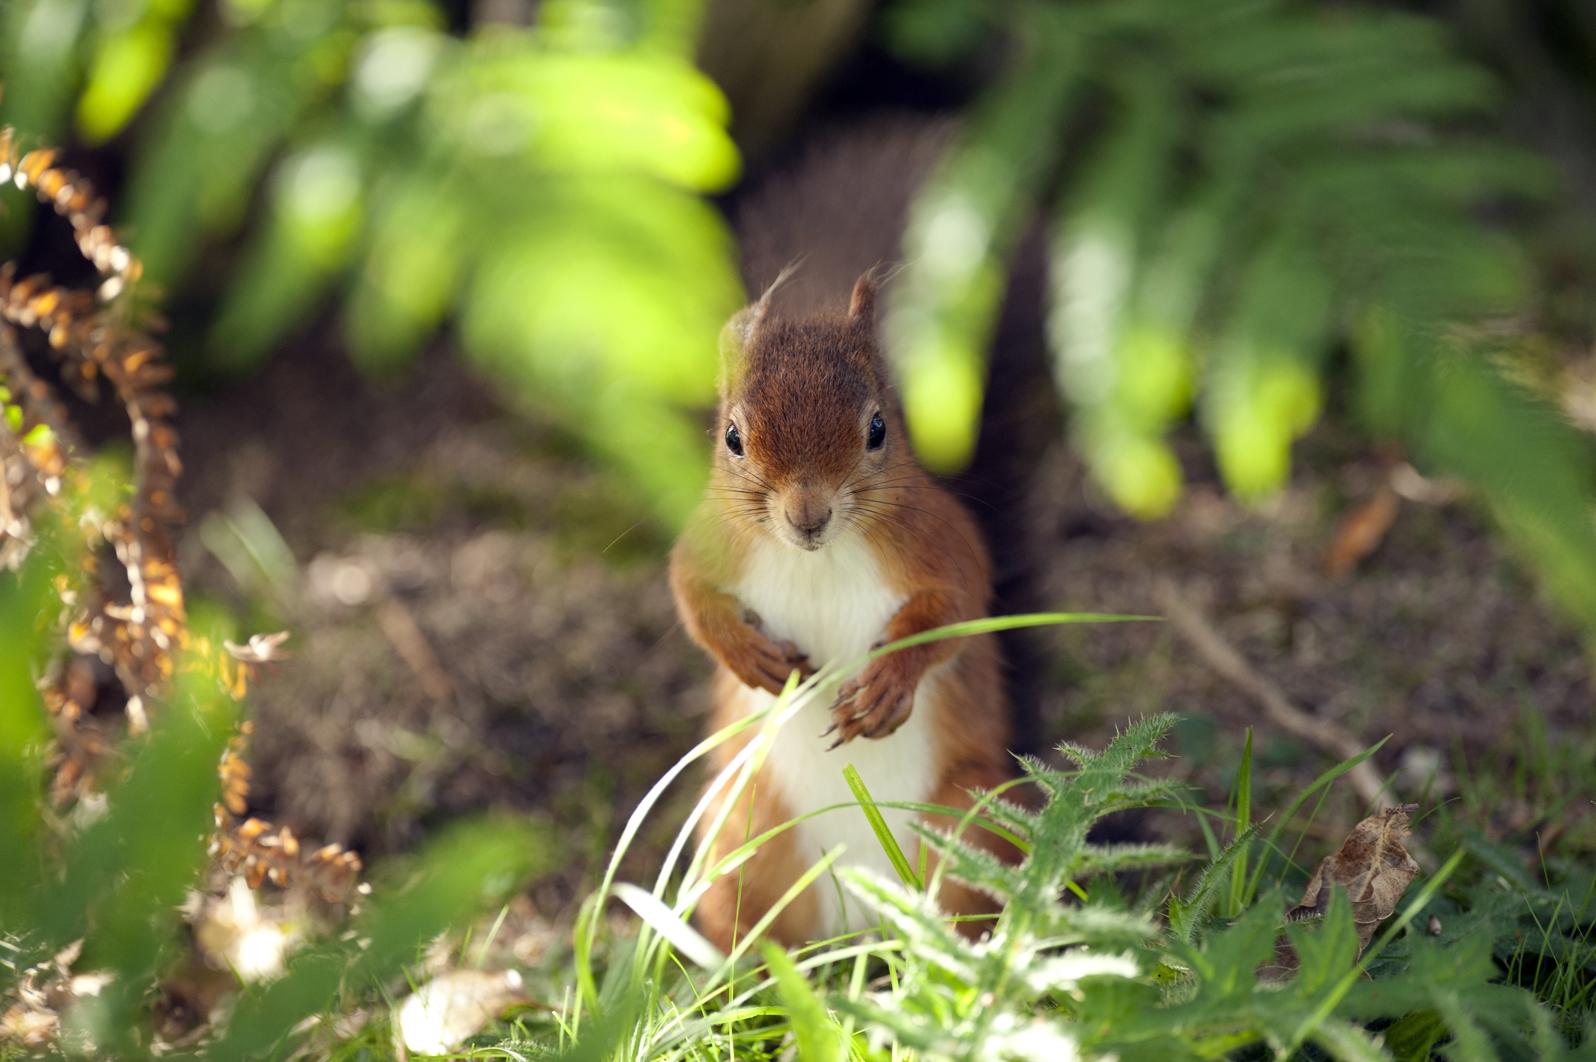 Brownsea island in Dorset is home to over 250 red squirrels